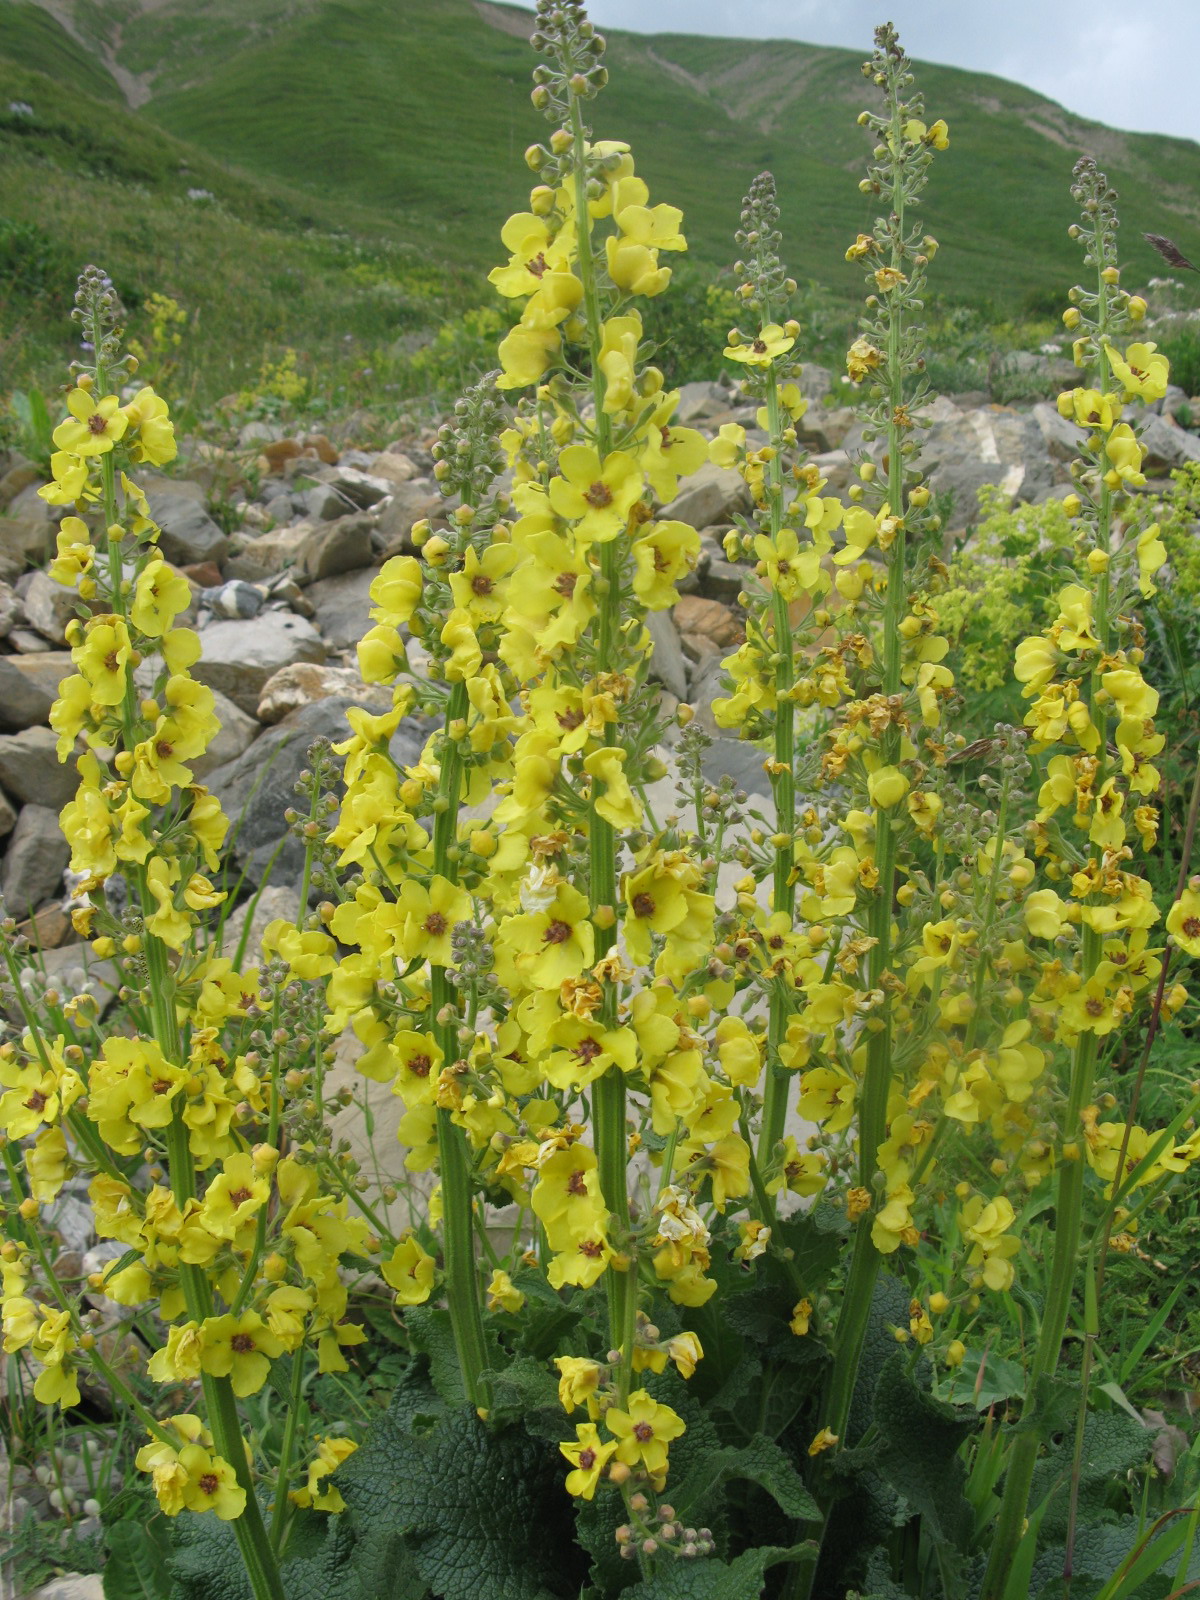 yellow flowers with pink center, yellow-green buds, green leaves and stems